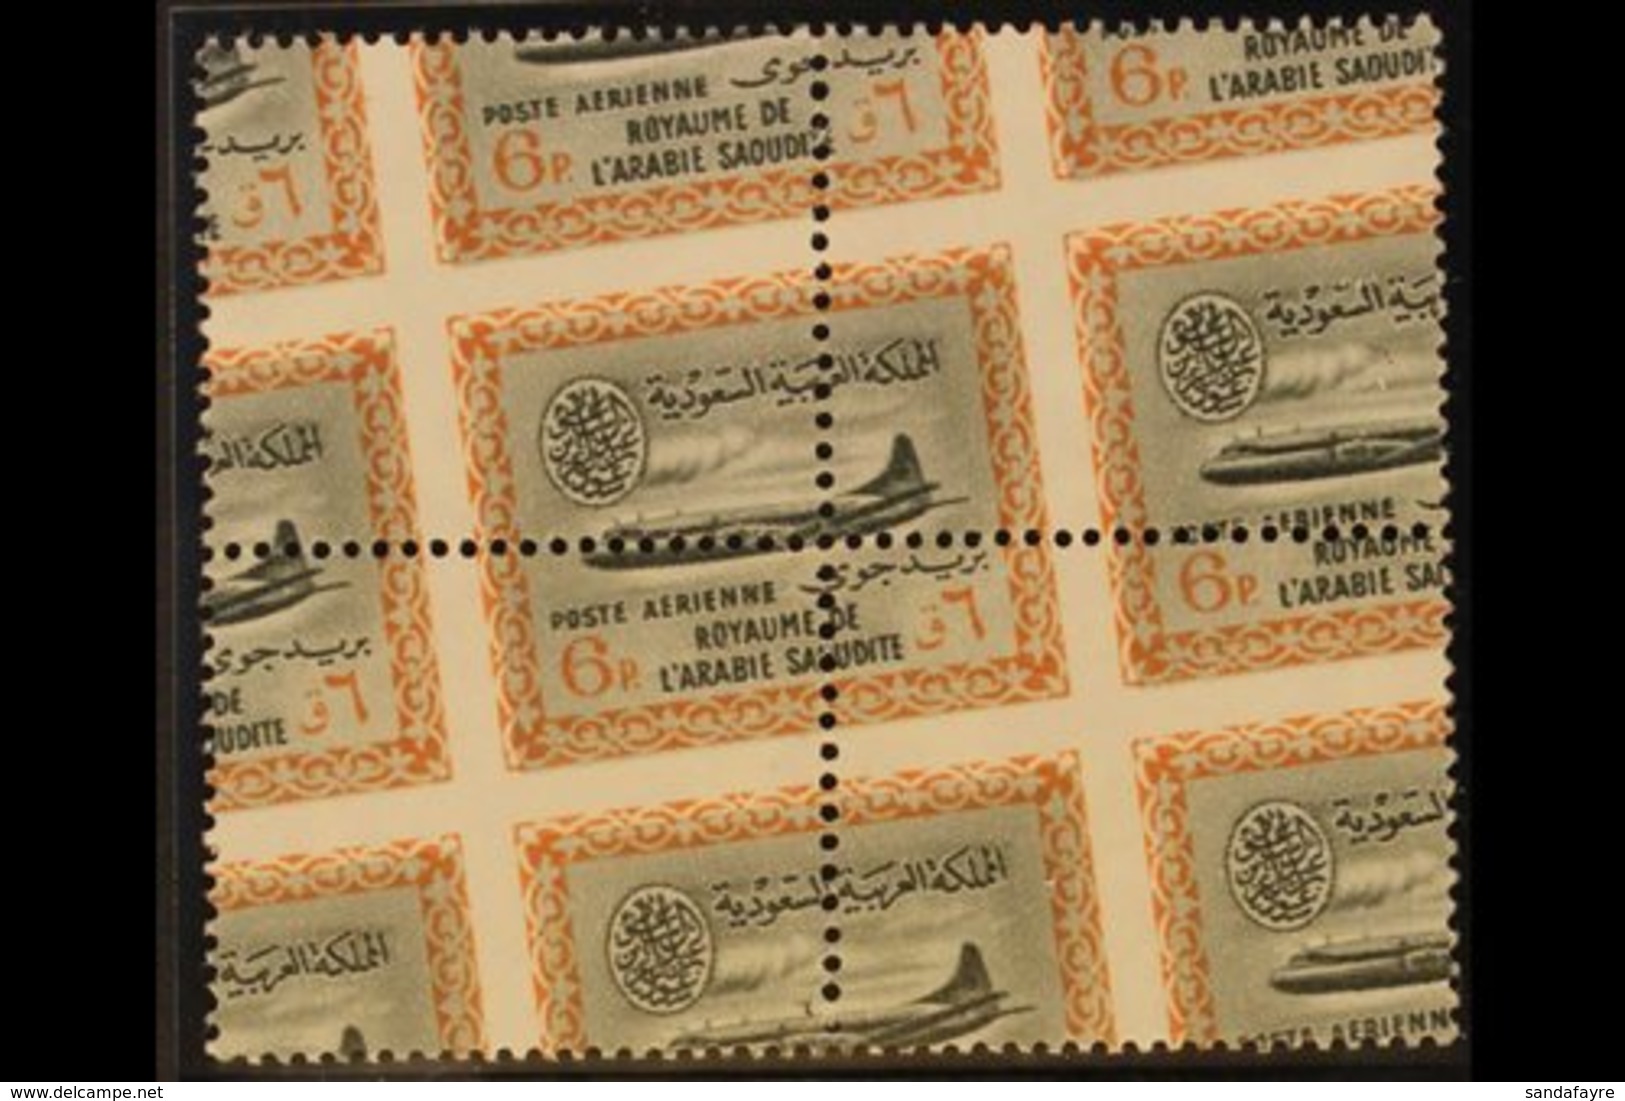 1963-5 6p Vickers Viscount Airmail, SG 484, Superb Never Hinged Mint Block Of 4 With Spectacular Mis-perforation. Ex Von - Saudi Arabia